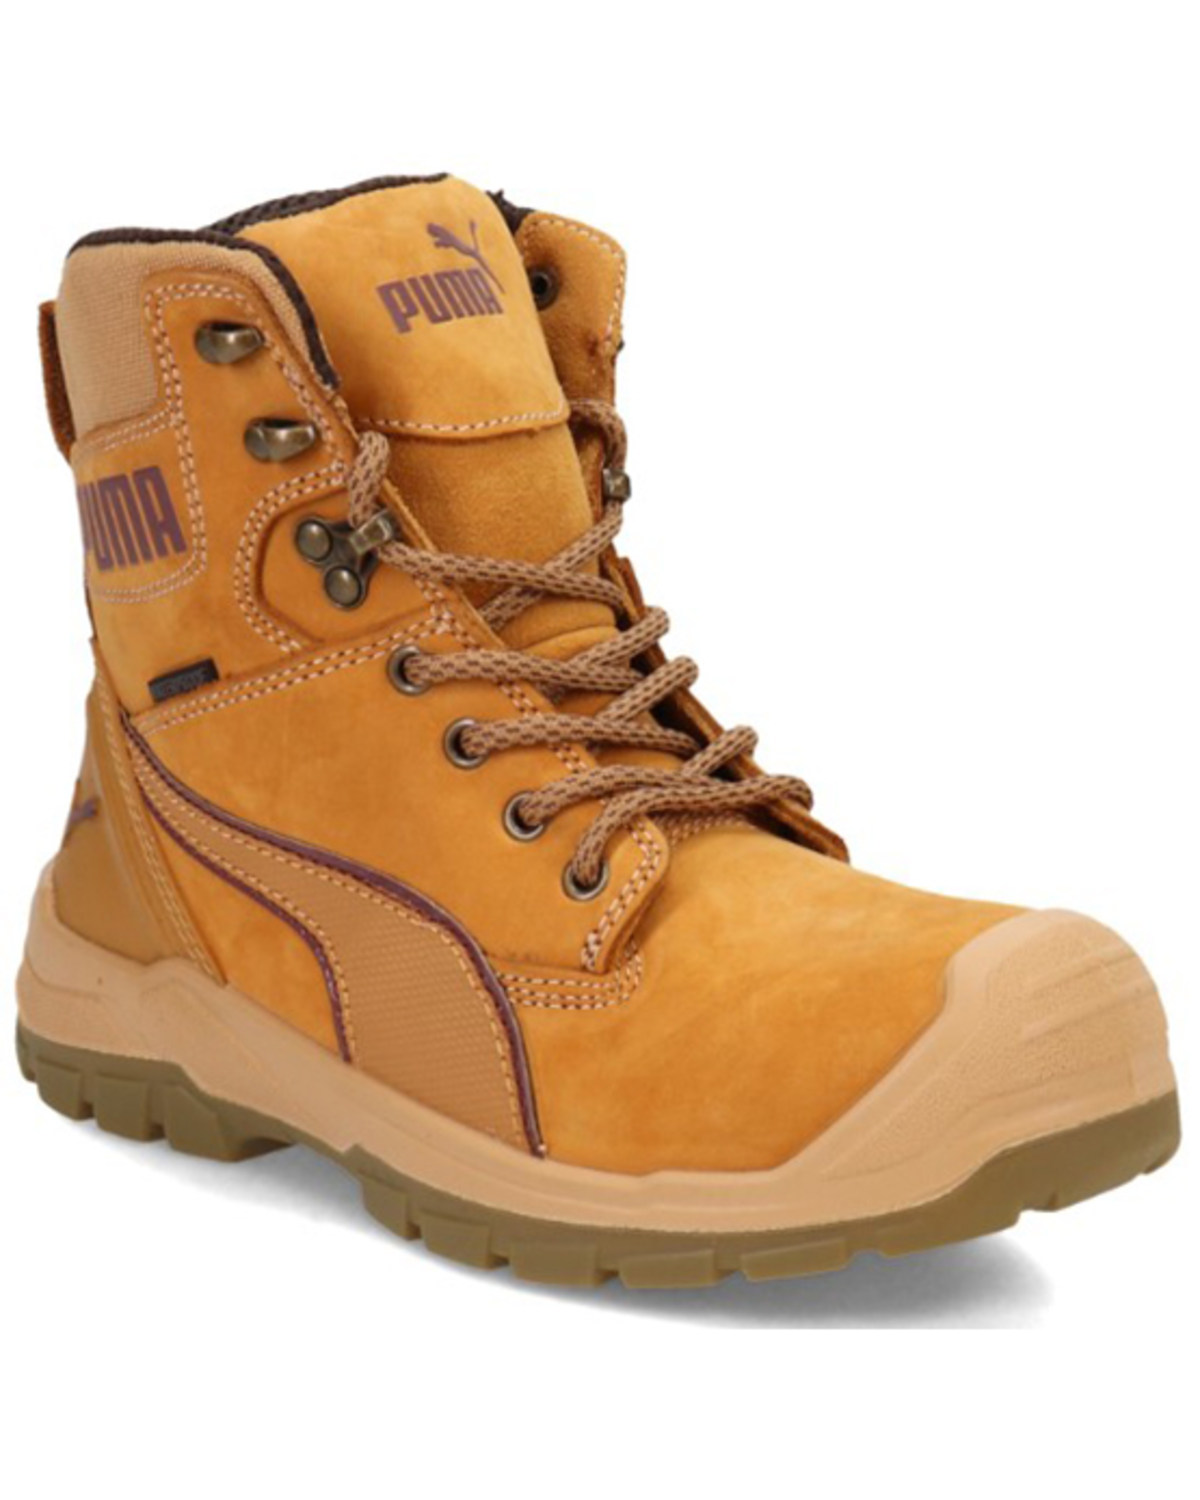 Puma Safety Women's Conquest 7" Waterproof Work Boots - Composite Toe